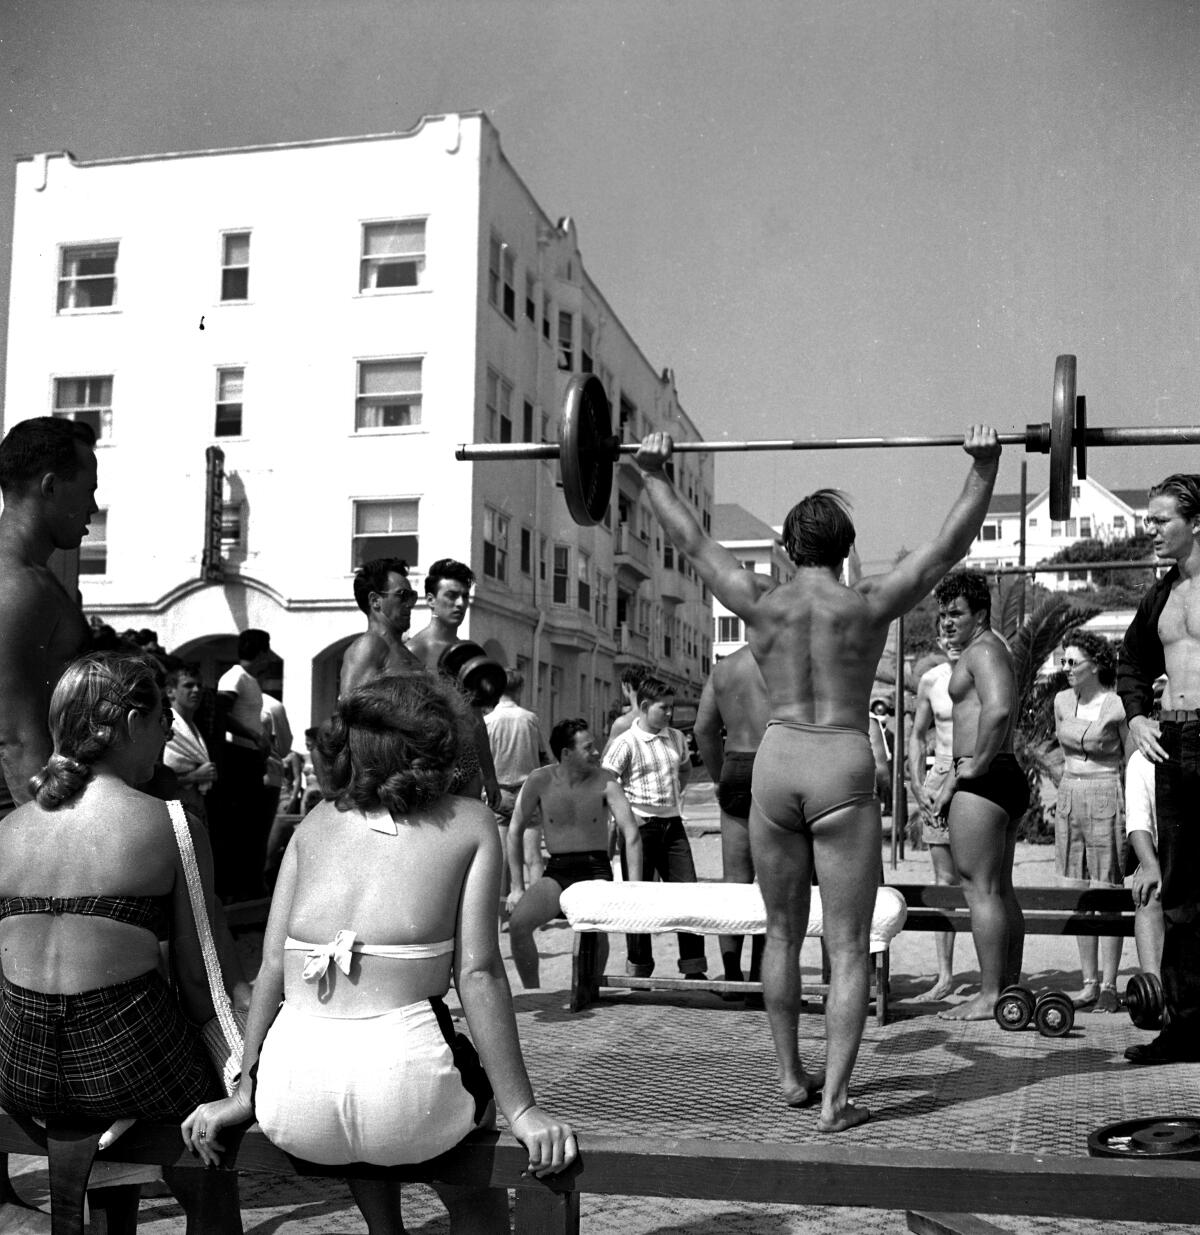 A muscled shirtlesss man lifts weights at Muscle Beach in Santa Monica,1949.